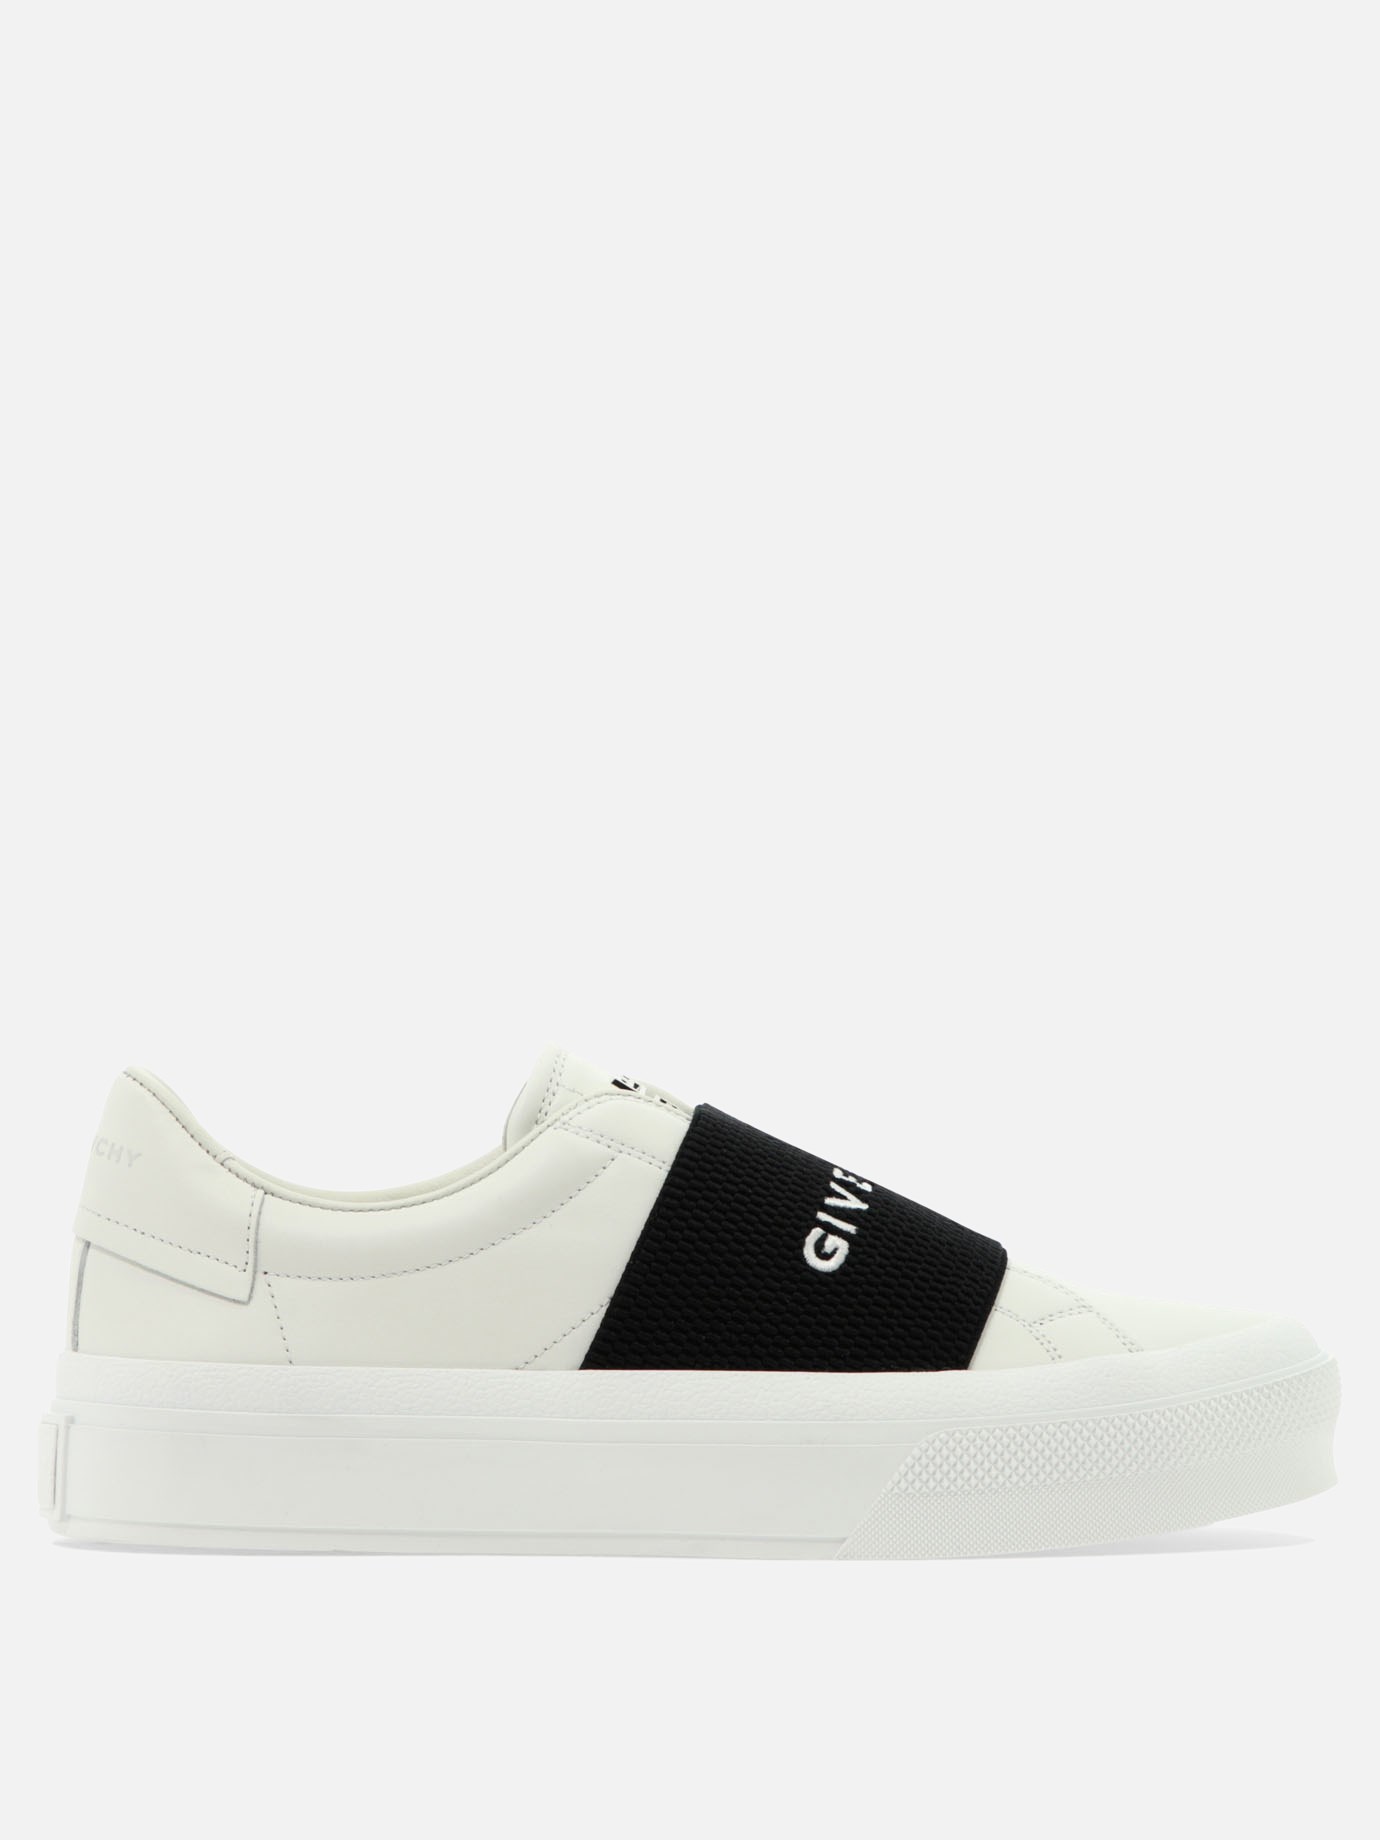  City Sport  sneakersby Givenchy - 0